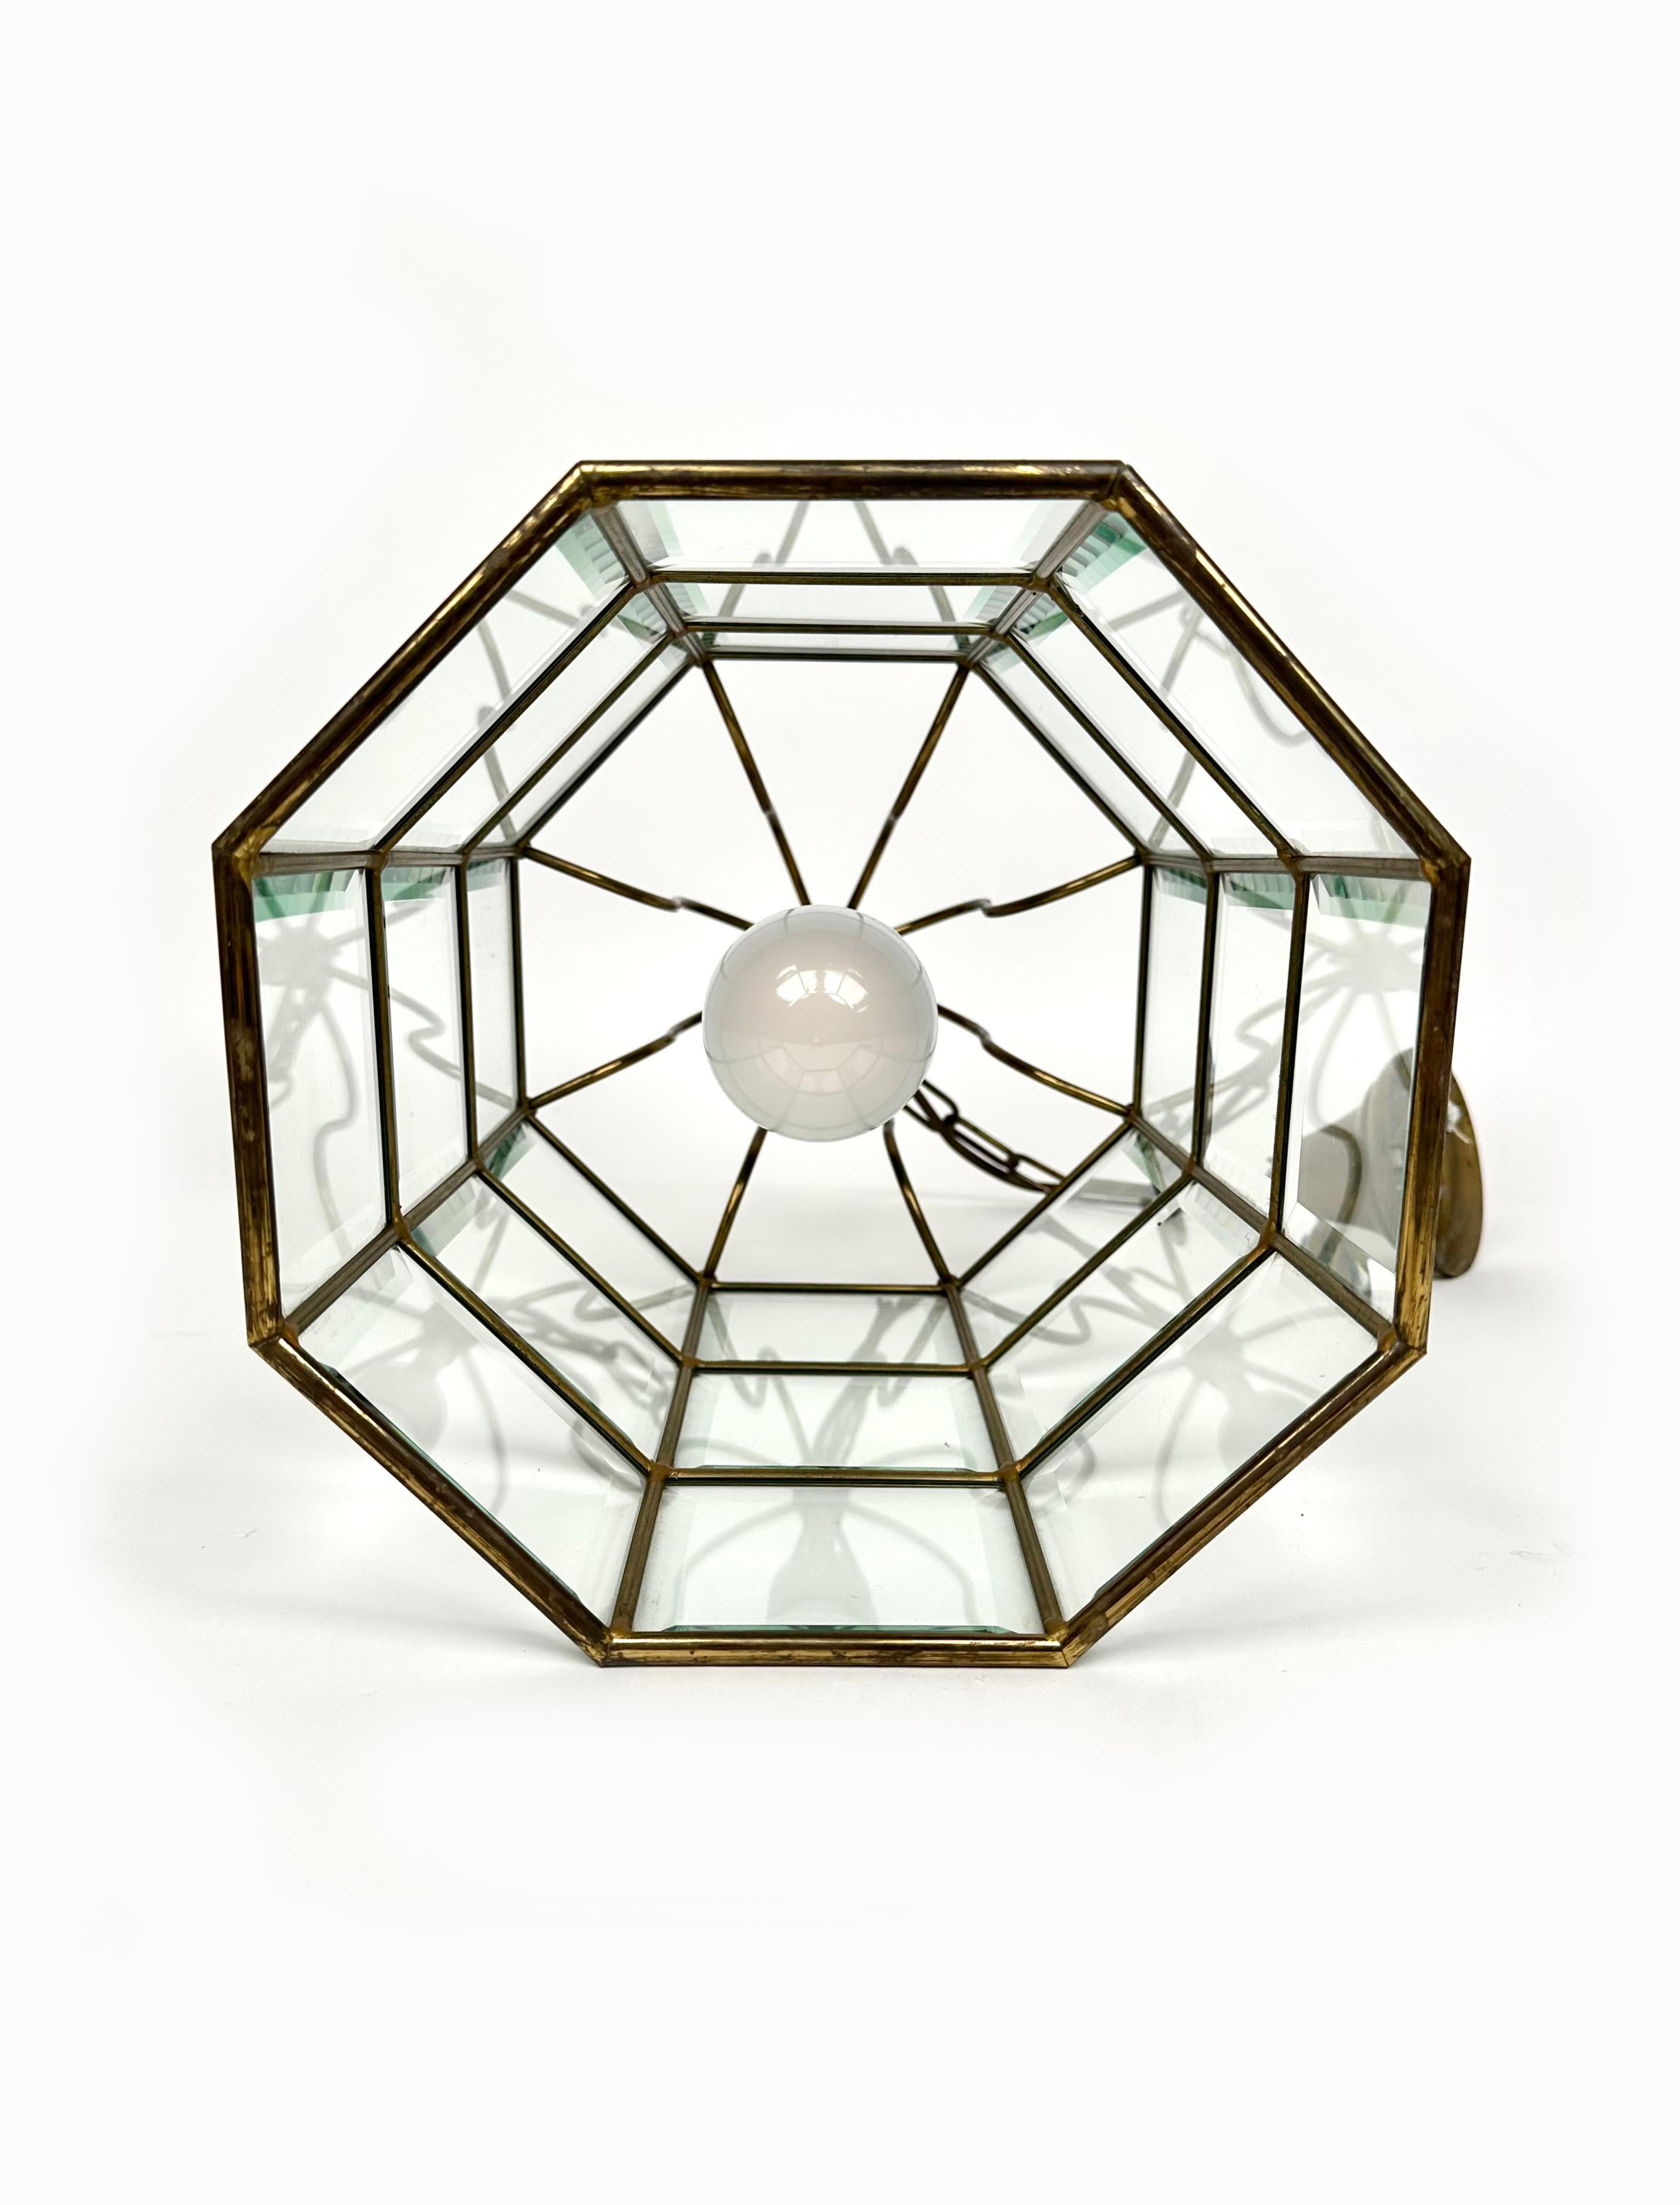 Brass and Beveled Glass Pendant Lantern Adolf Loos Style, Italy 1950s For Sale 3